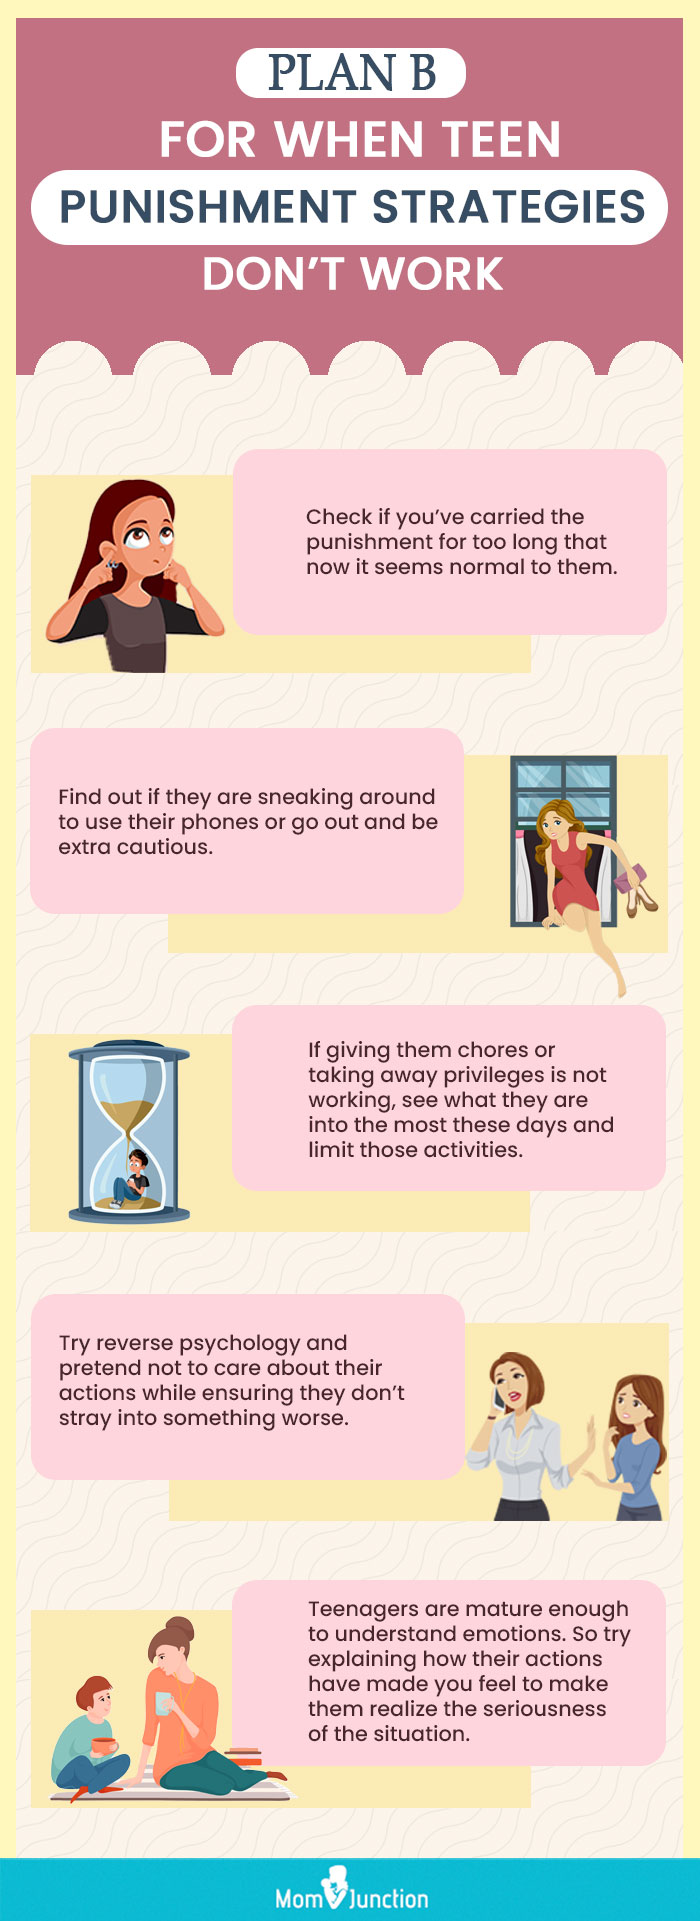 plan b for when teen punishment strategies don’t work [infographic]